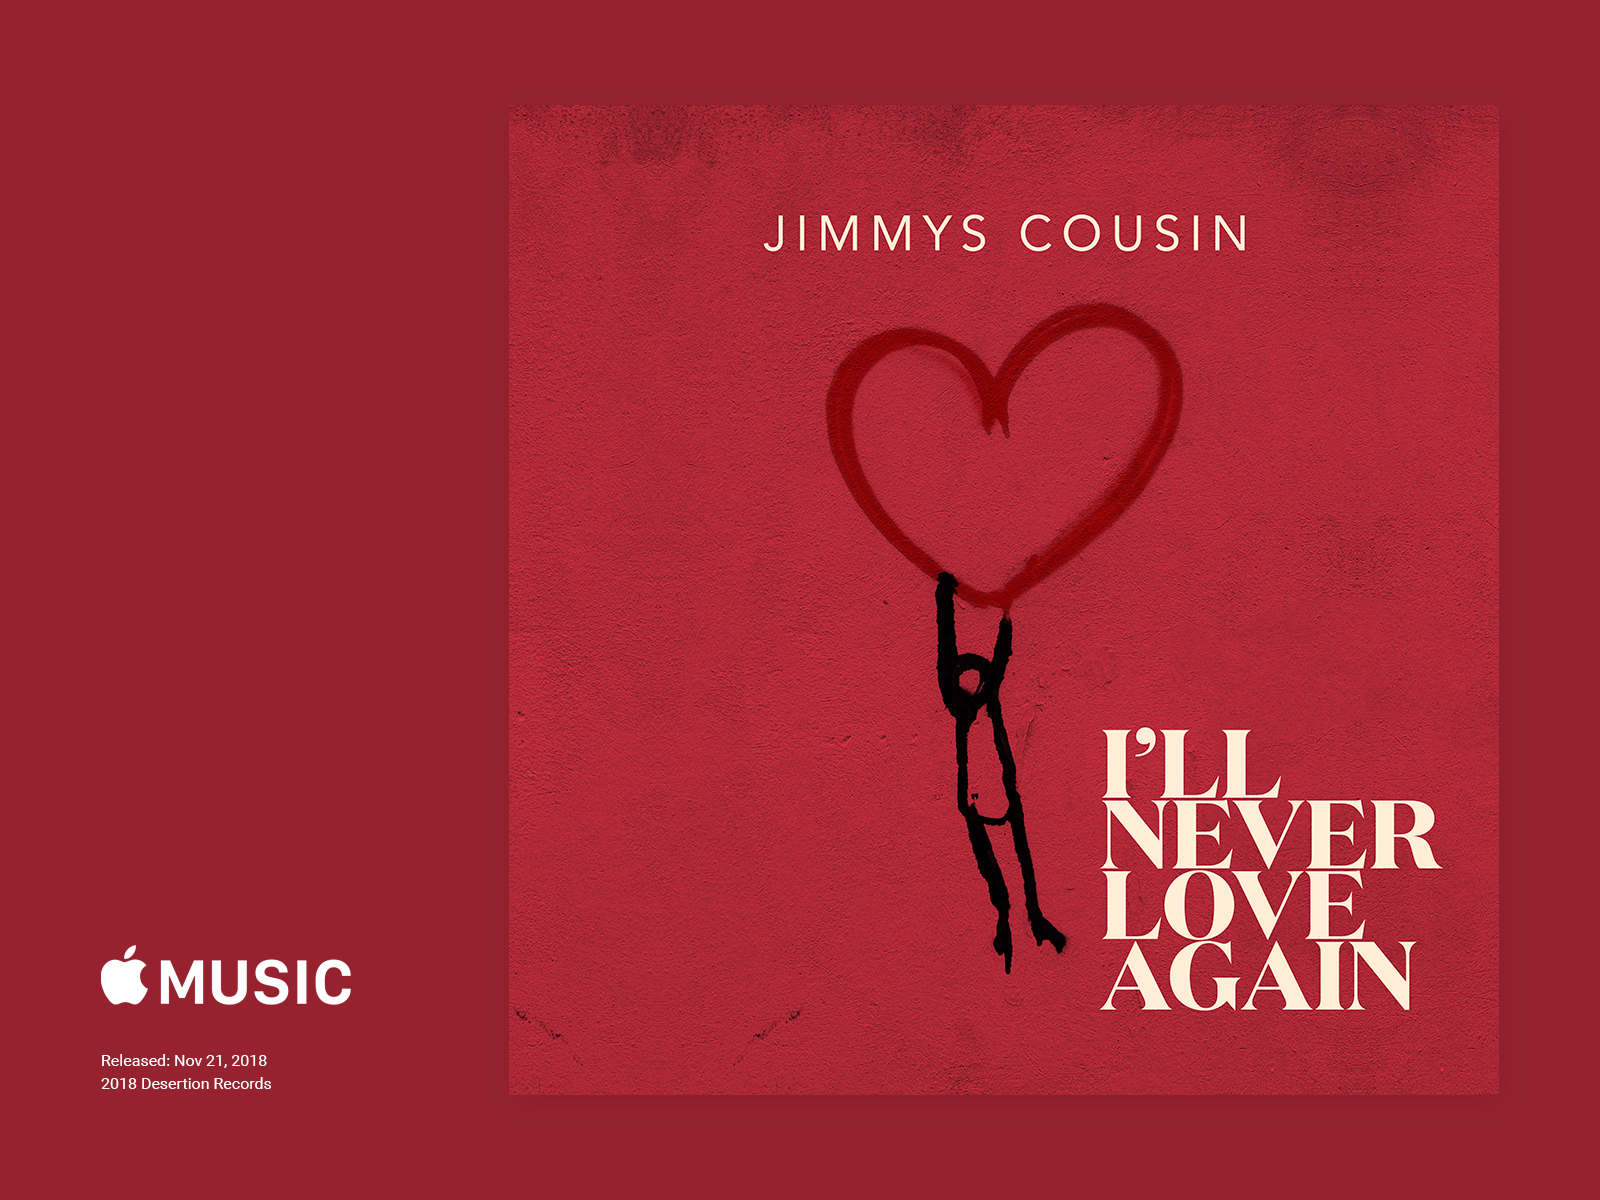 Jimmy's Cousin - I'll Never Love Again CoverArt by Ray Doyle